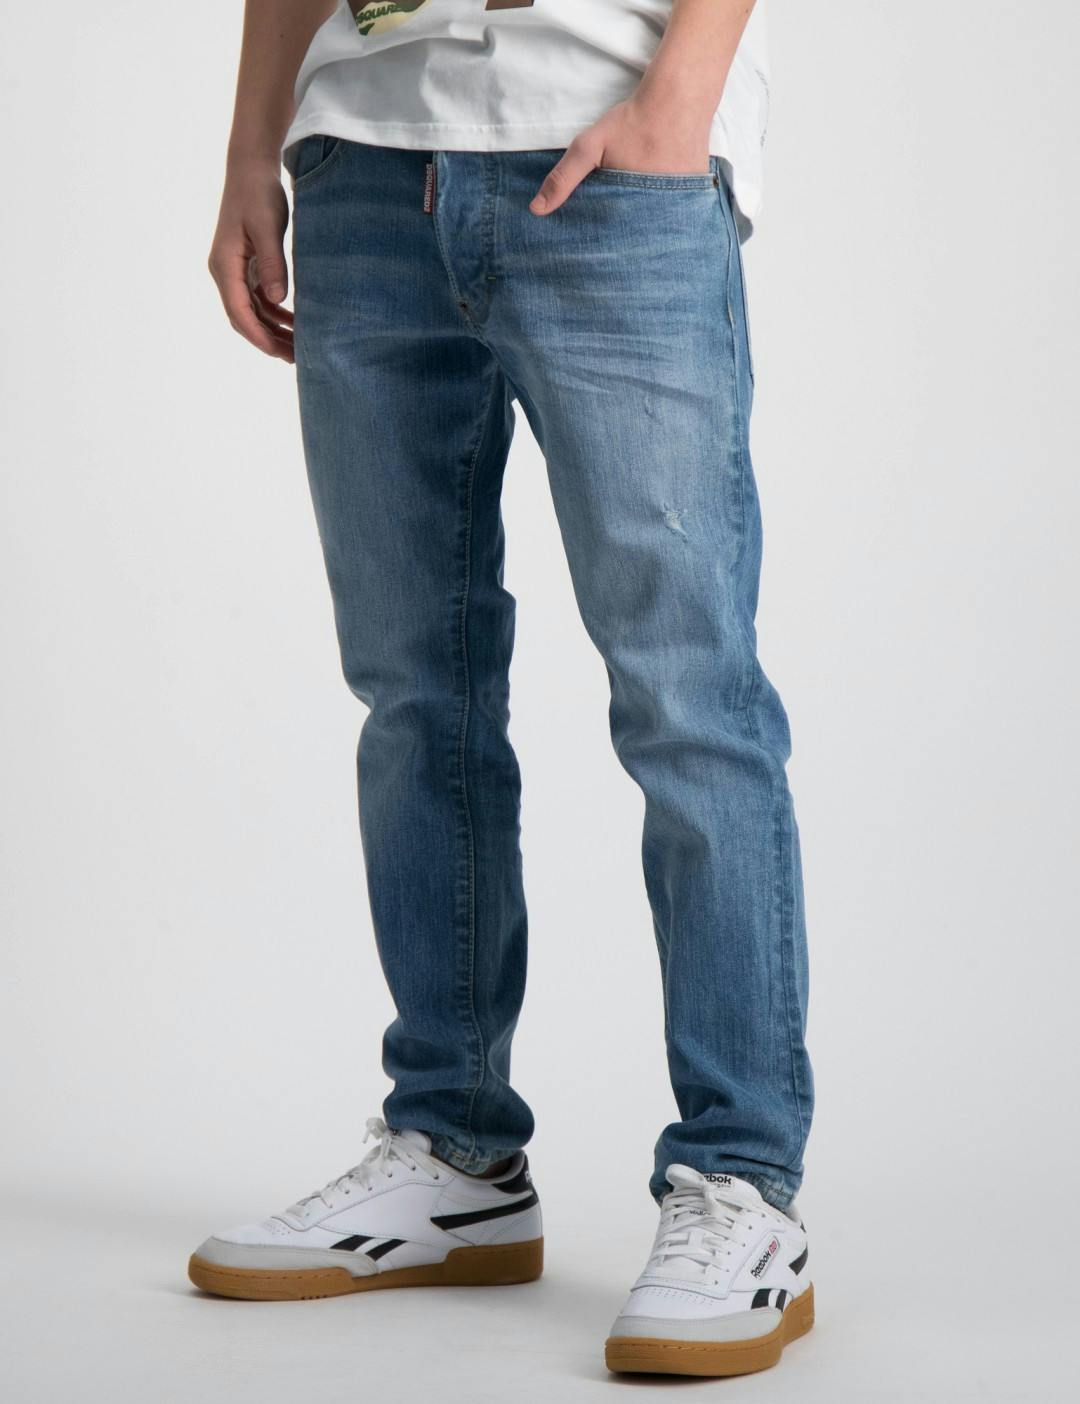 D2P118LM SKATER JEAN TROUSERS